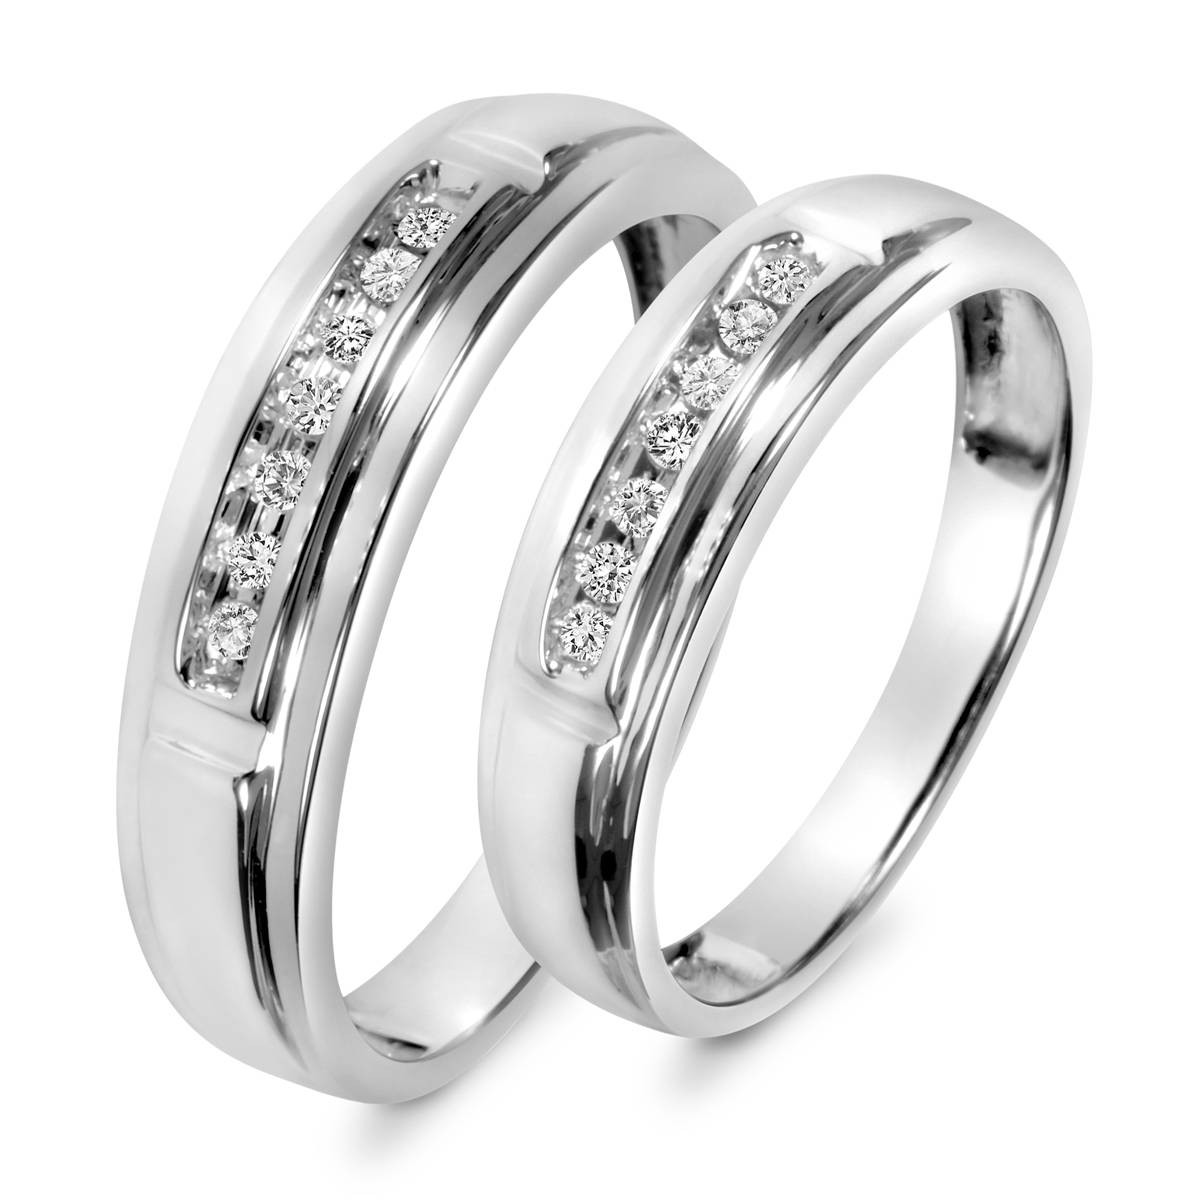 White Gold Wedding Bands Sets
 15 Inspirations of Cheap Wedding Bands Sets His And Hers